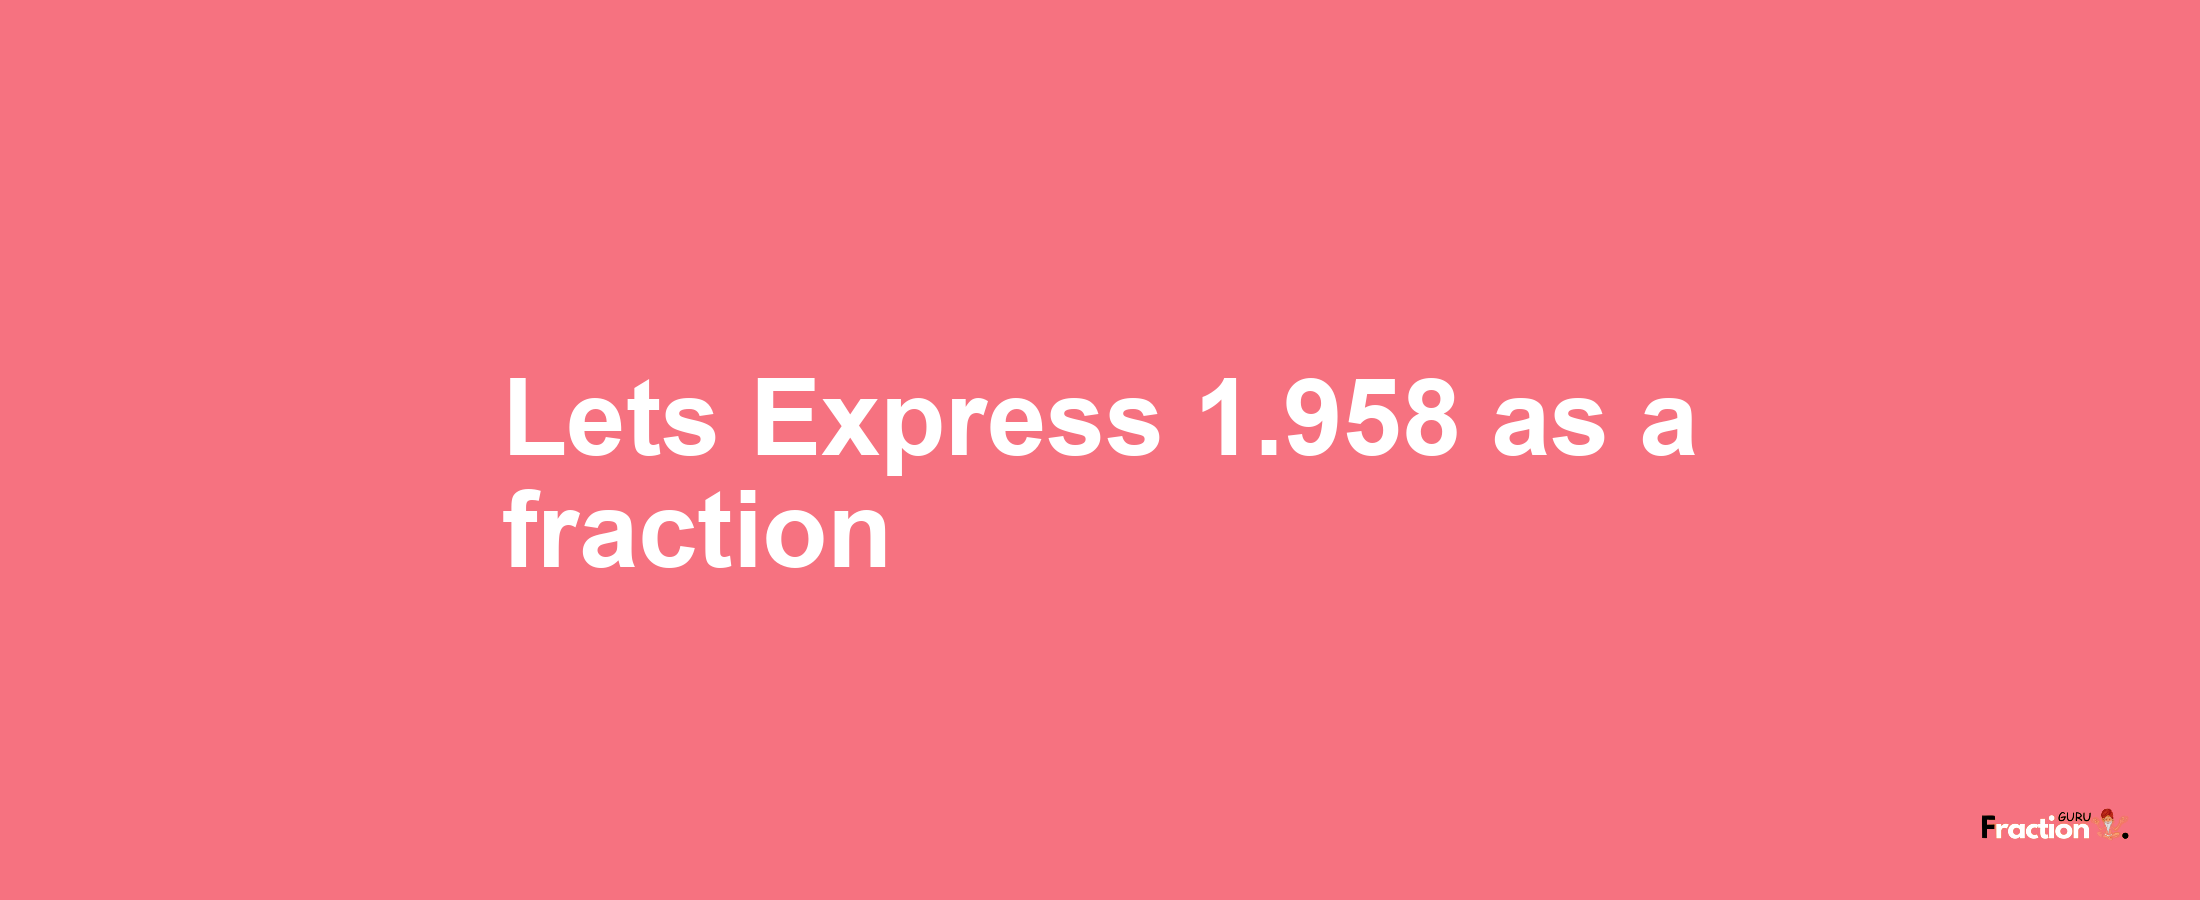 Lets Express 1.958 as afraction